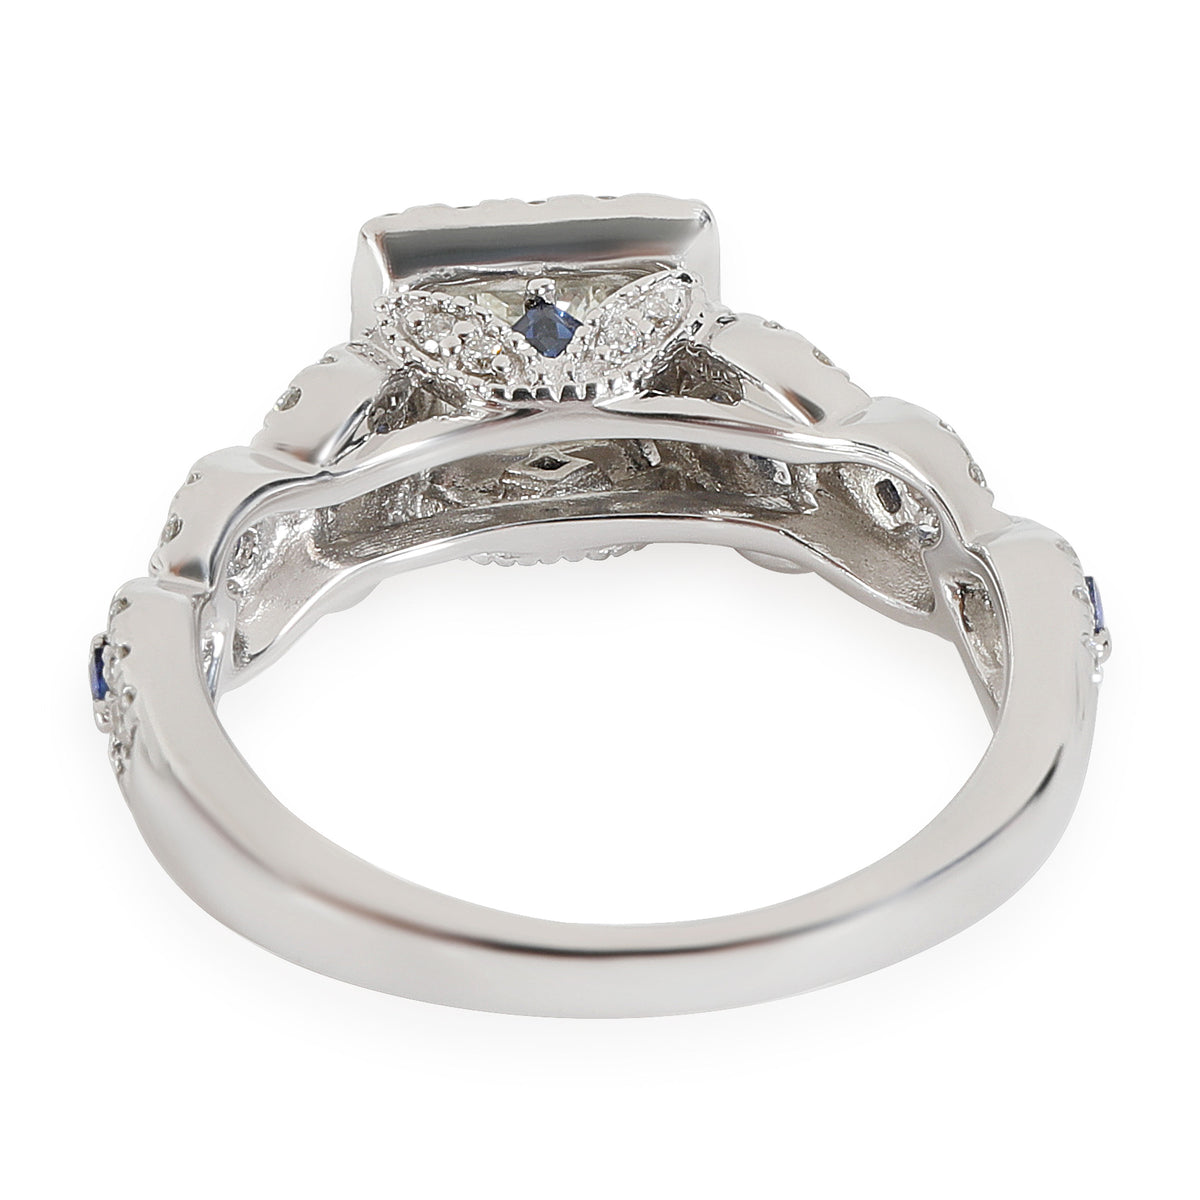 Vera Wang Love Collection  Engagement Ring in 14K  White Gold 1 CTW